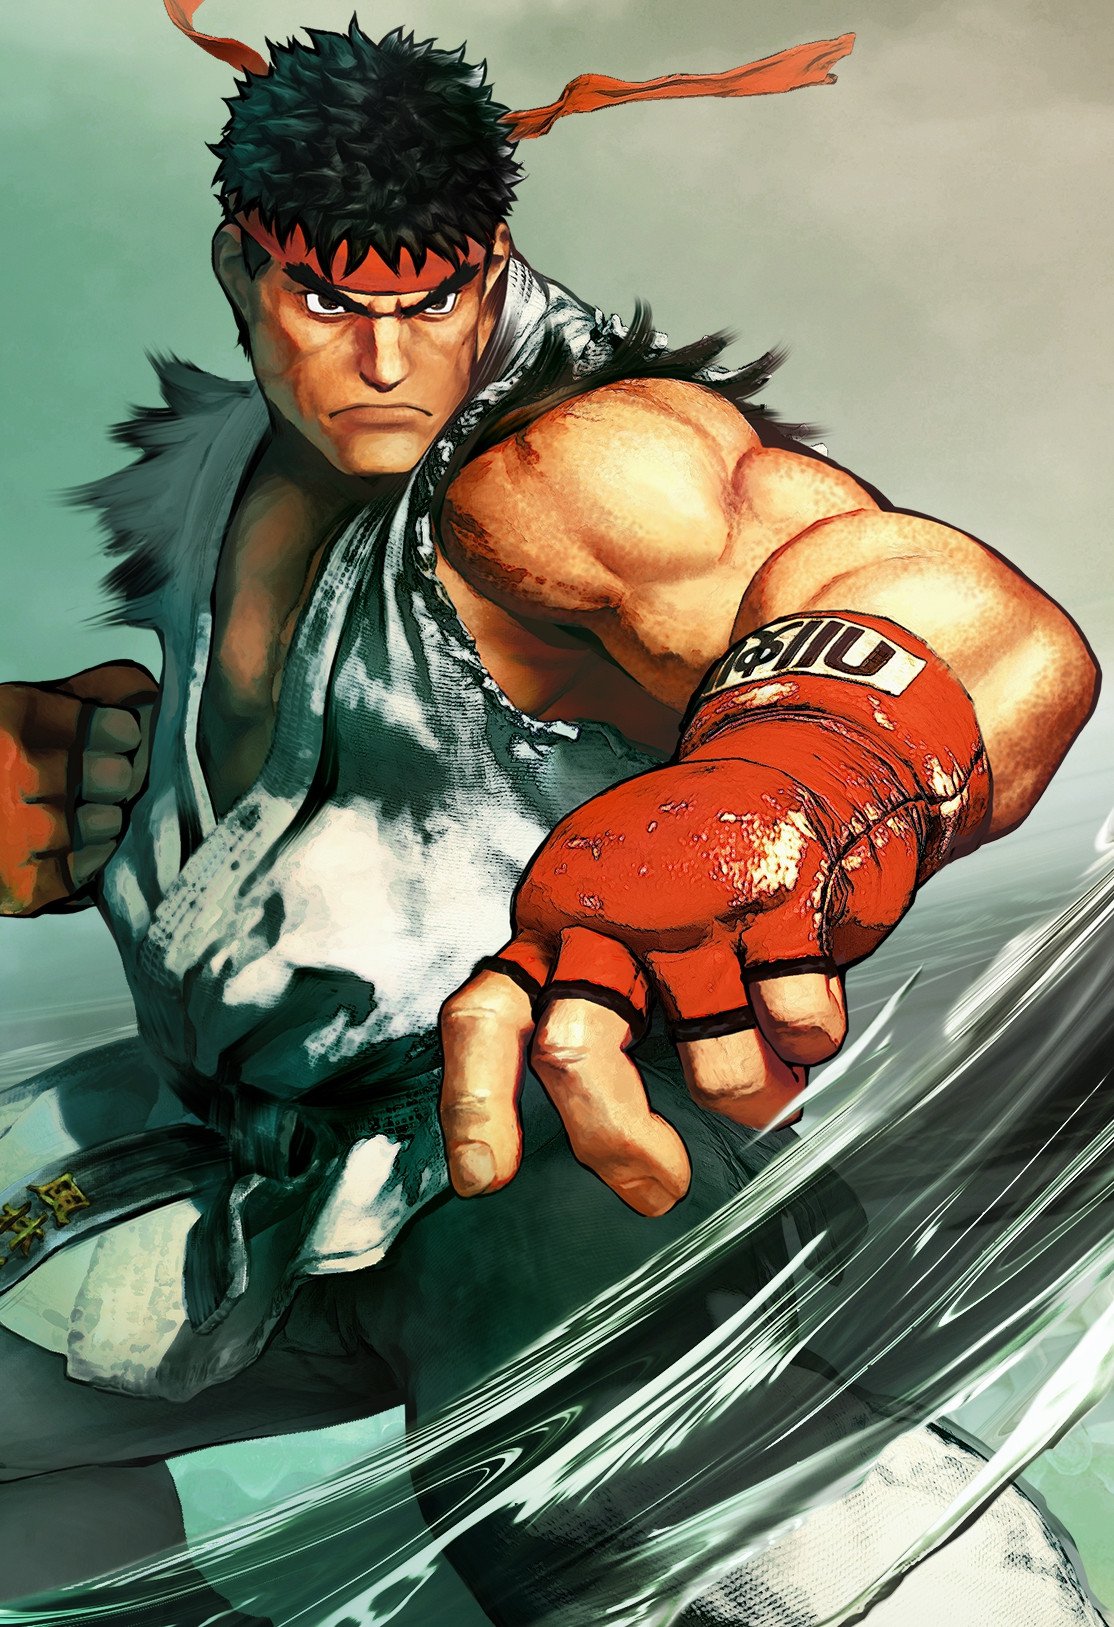 Street Fighter 4 - TFG Review / Art Gallery